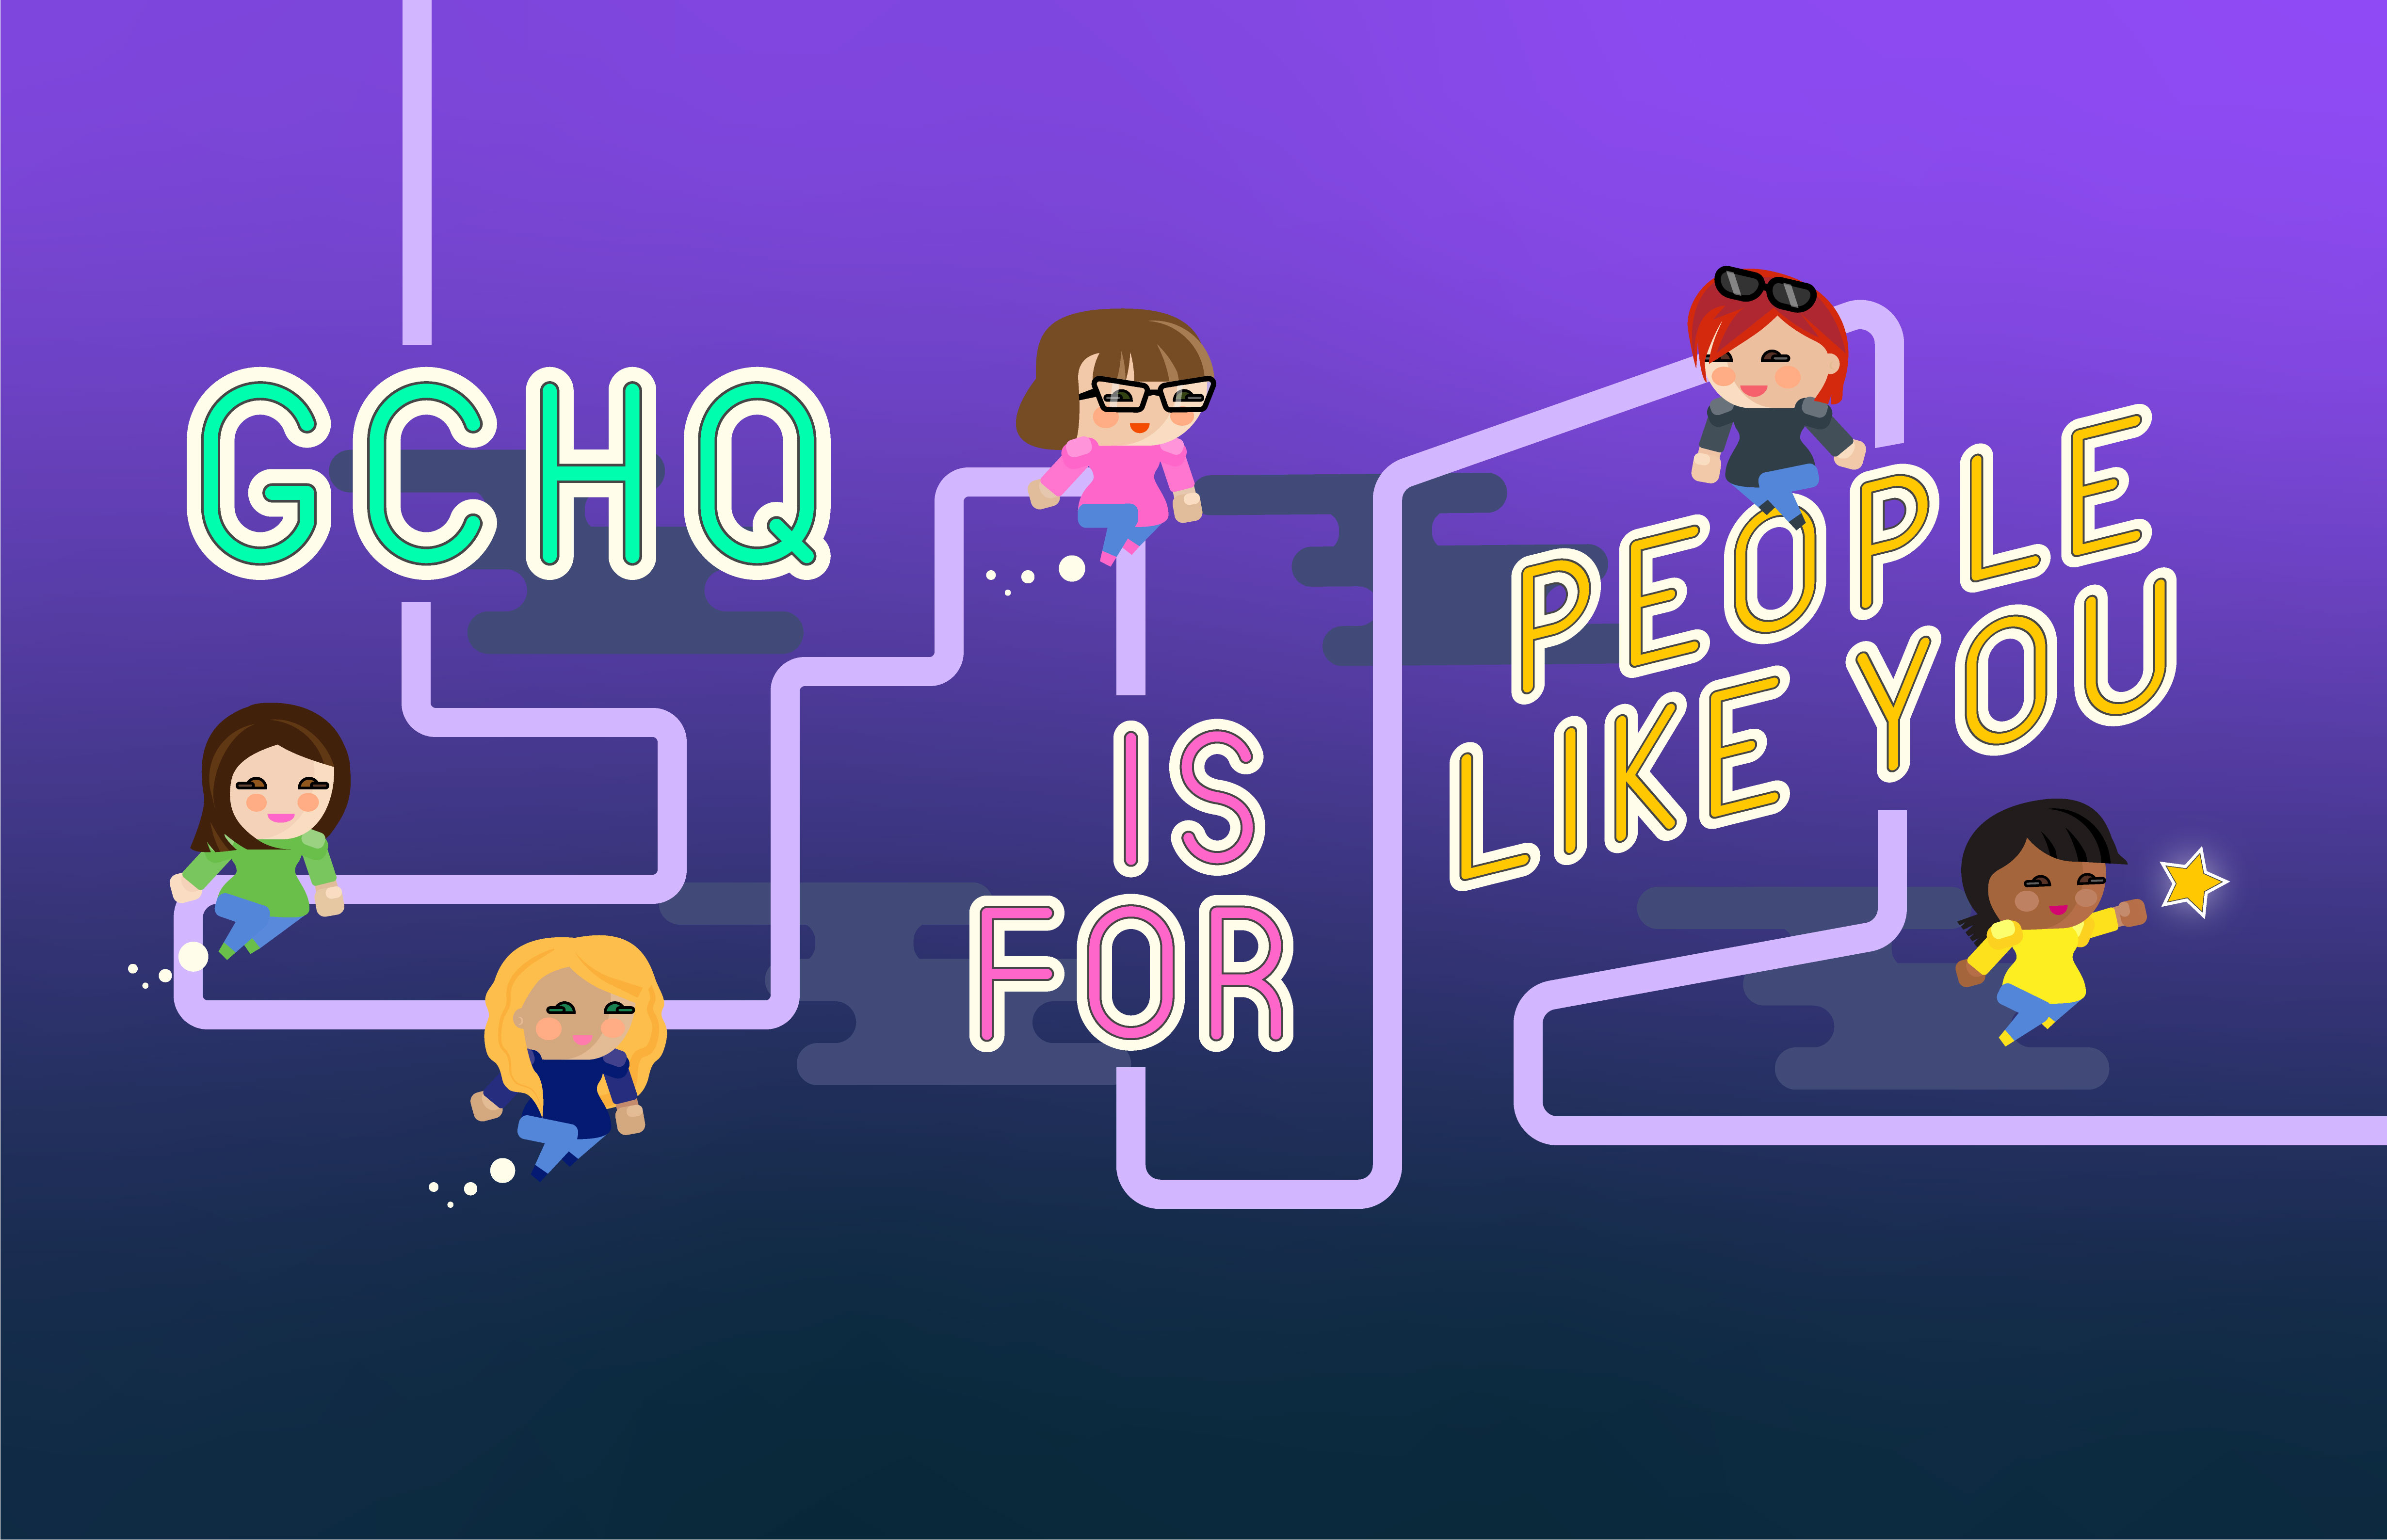 Graphic showing the words 'GCHQ is for people like you' along a timeline dotted with characters designed to represent case studies for the Journey into the Known GCHQ recruitment campaign